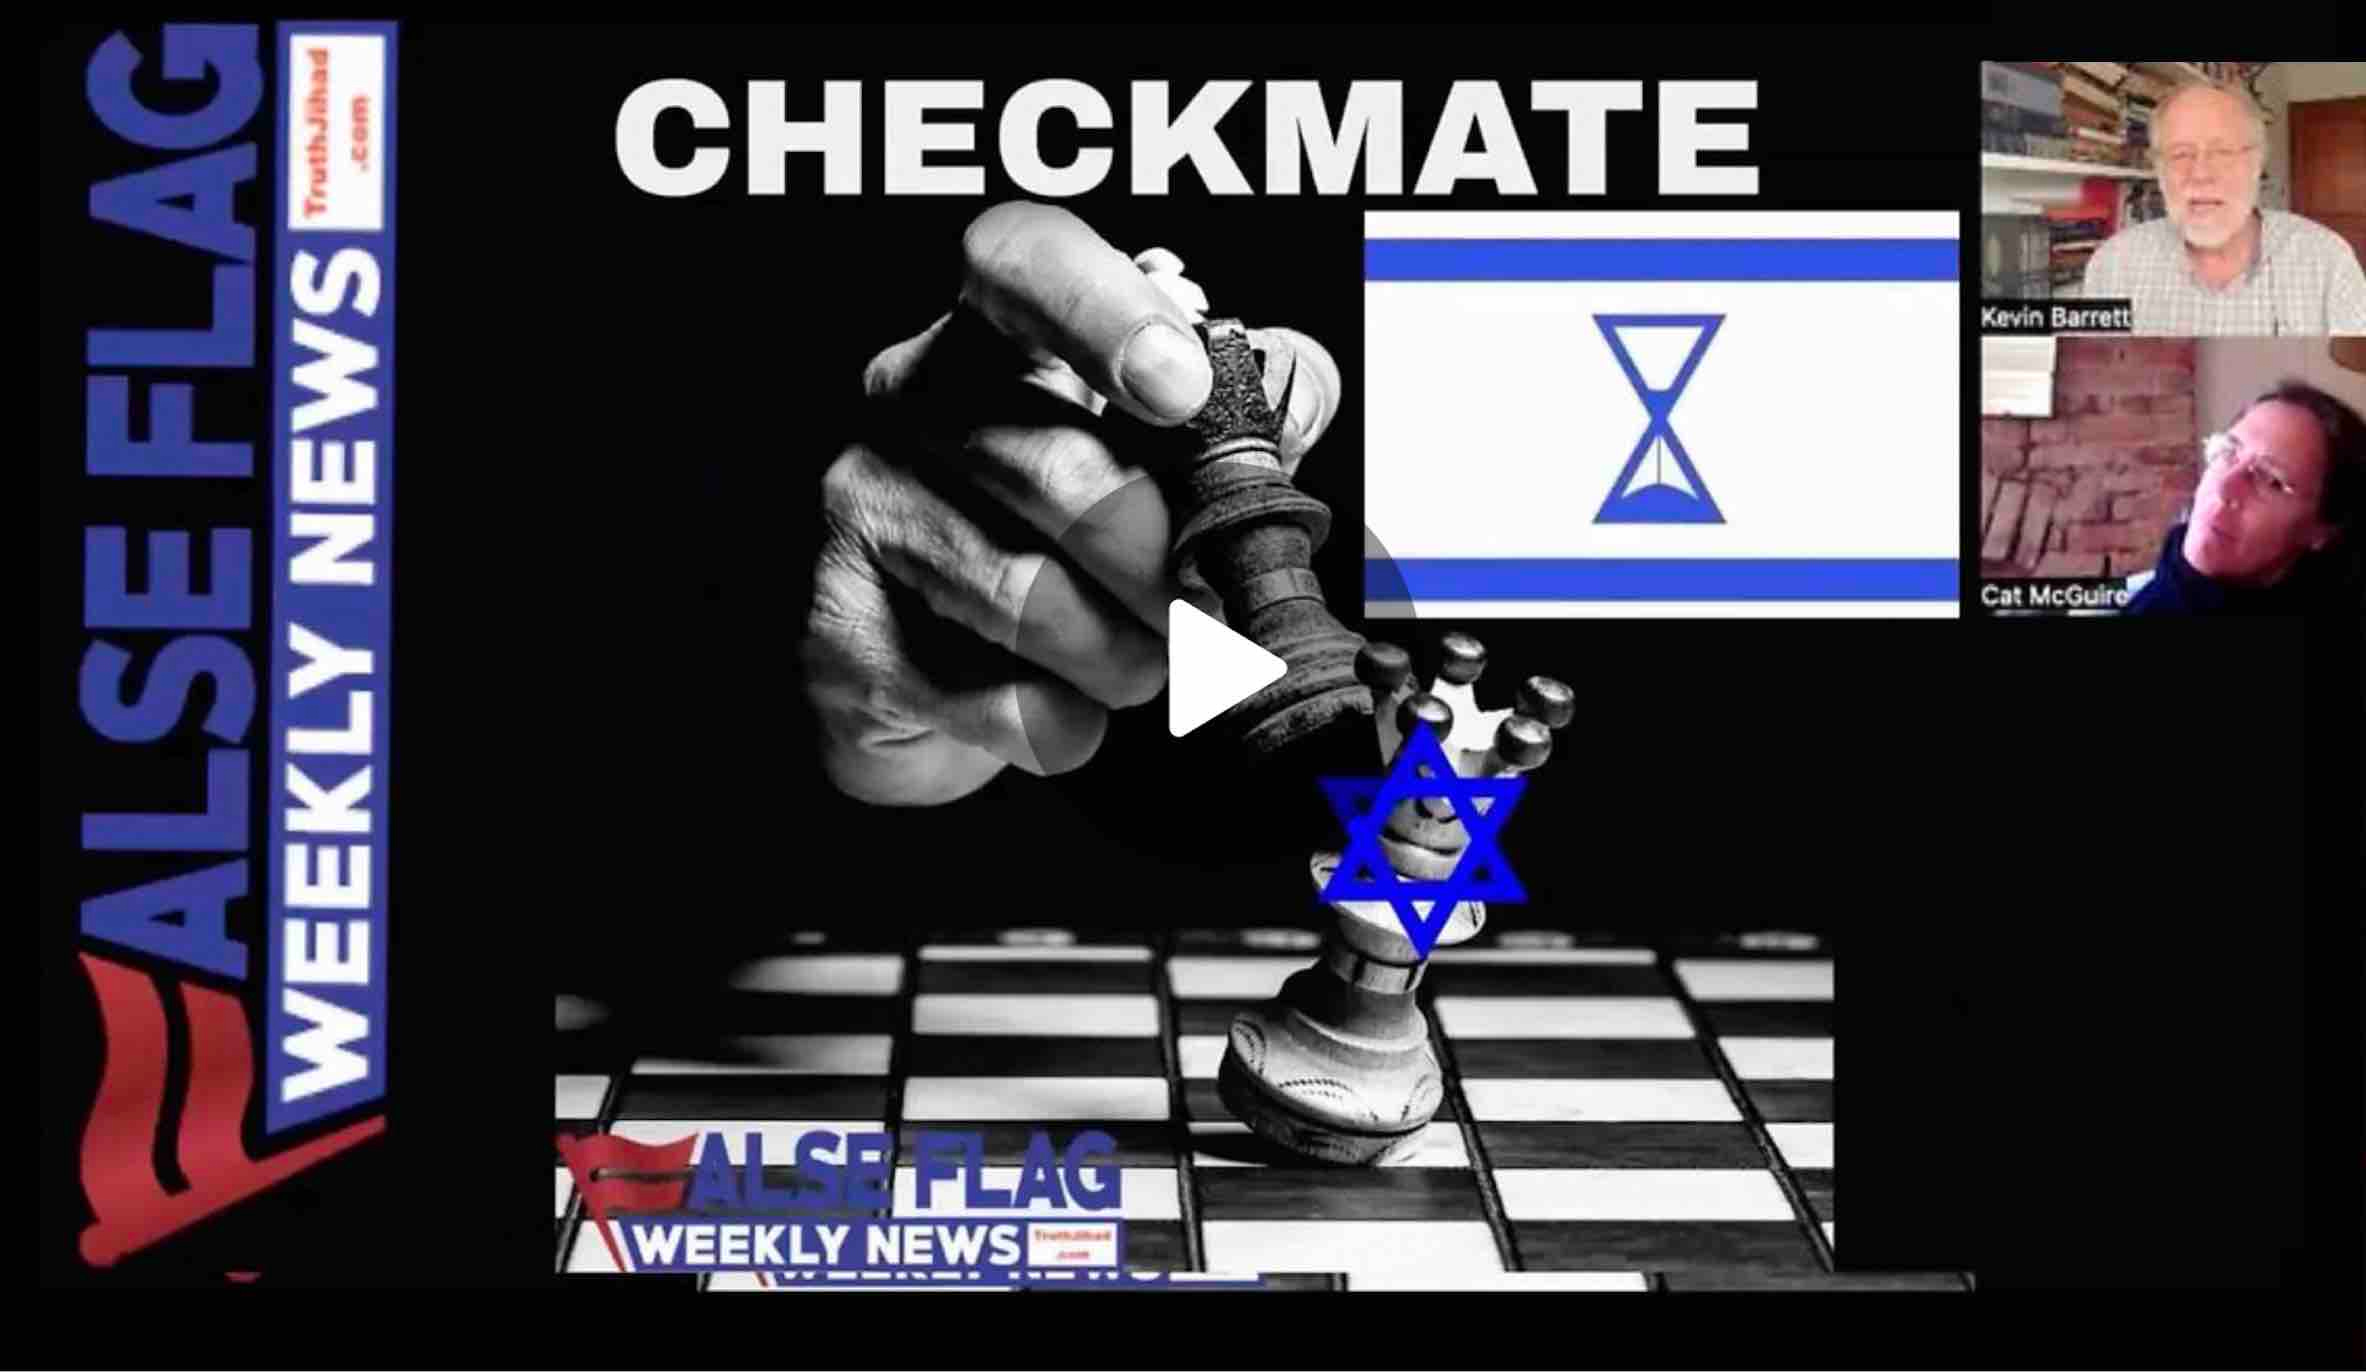 Israel Checkmated?